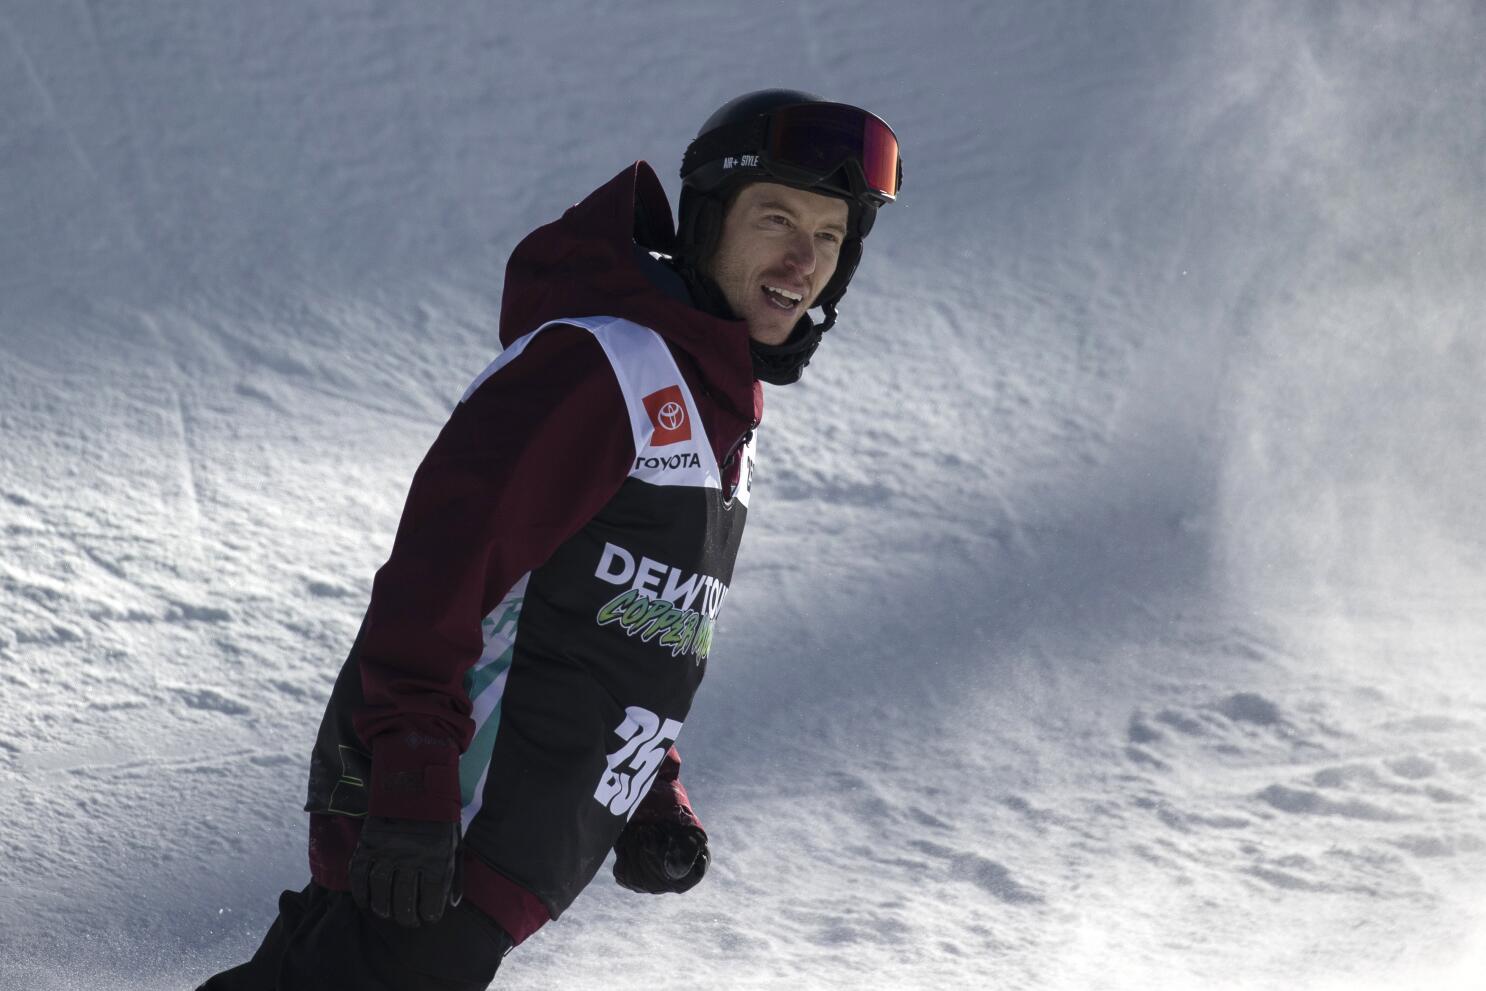 Olympic Moments: Shaun White soars to gold in snowboarding halfpipe and more